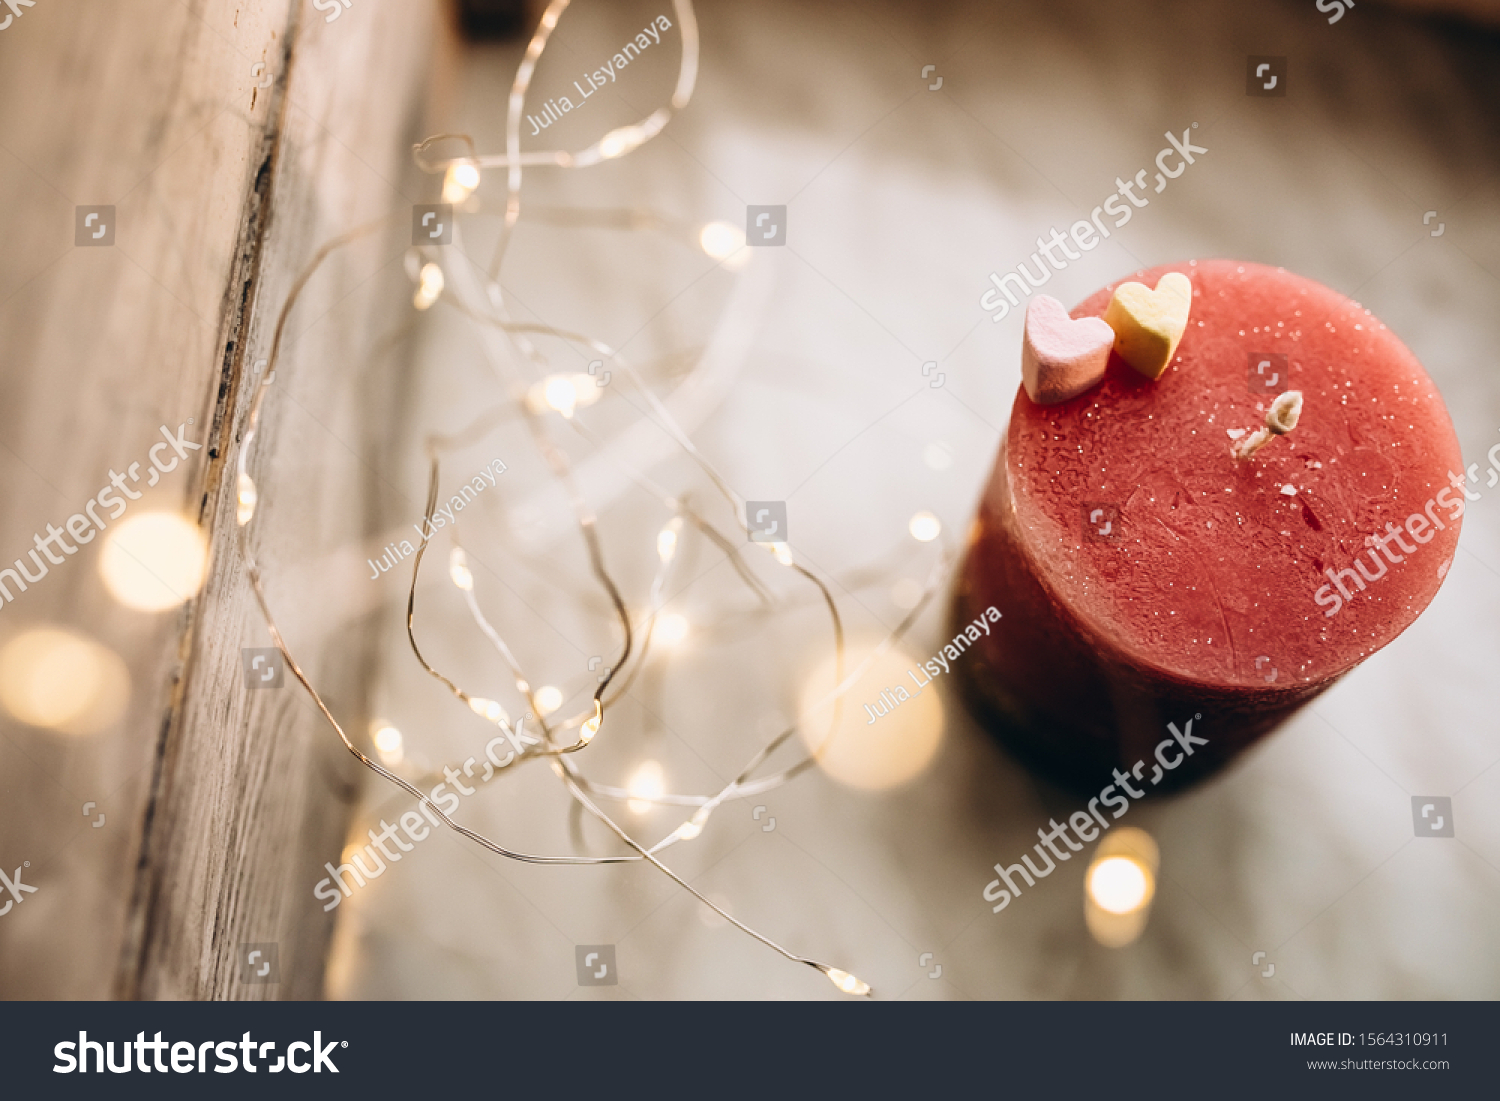 Romantic candle on a bokeh background. On top of the candle are two marshmallow hearts. New Year decorations and decorations #1564310911